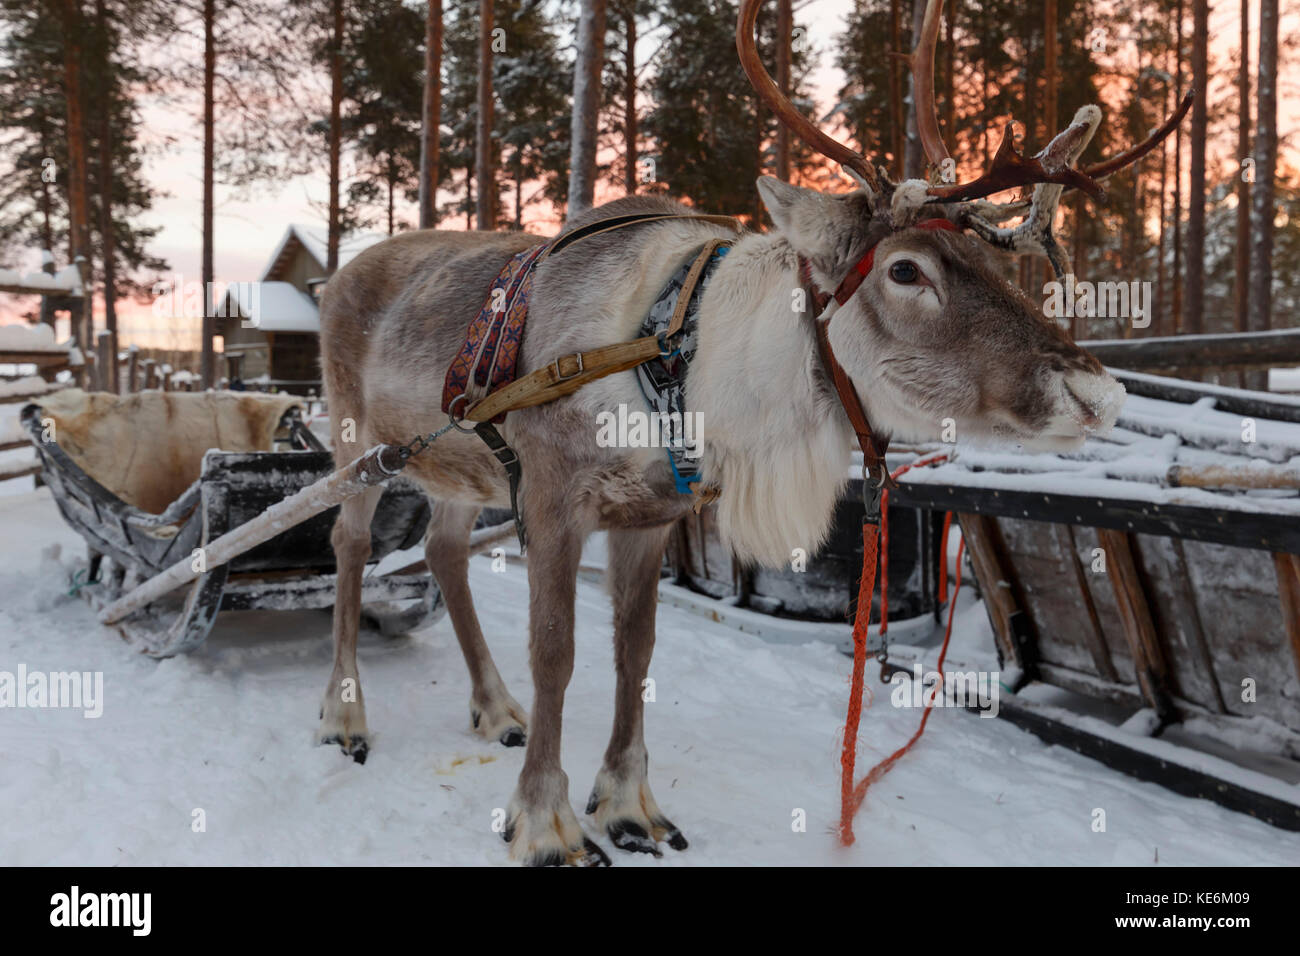 reindeer drawn sleigh in the winter Stock Photo